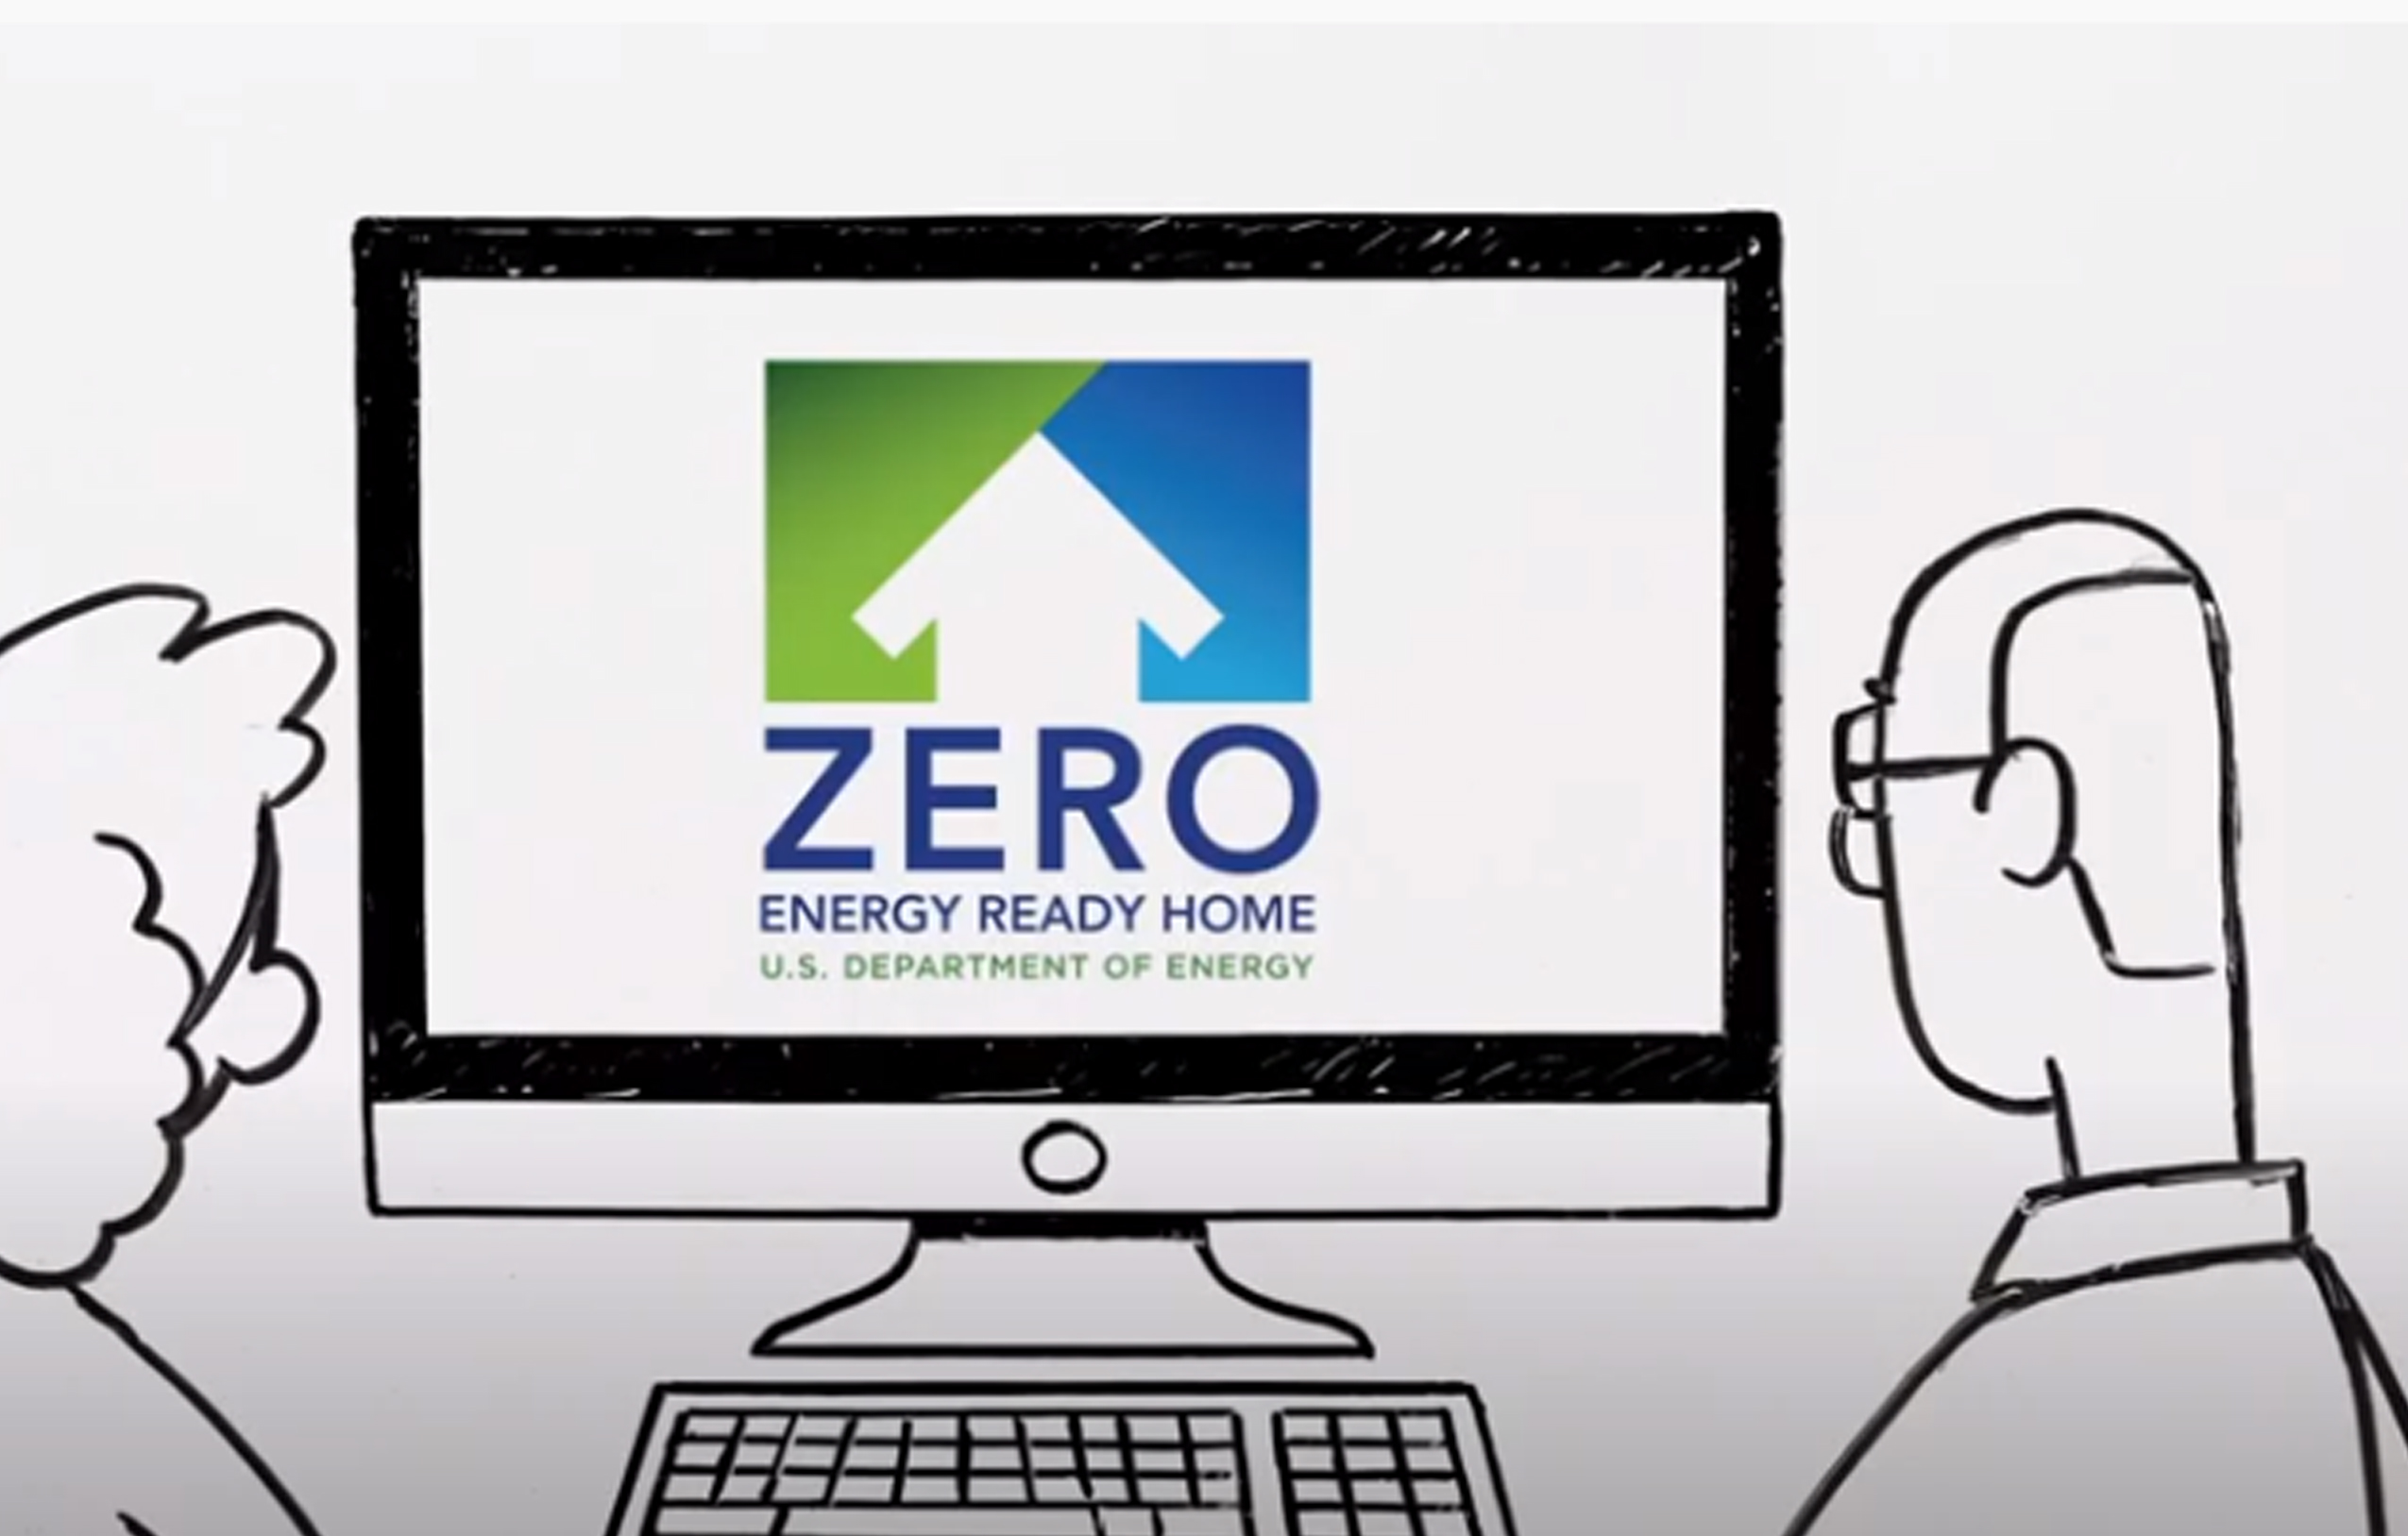 Healthy Homes with DOE Zero Energy Ready Home Certification